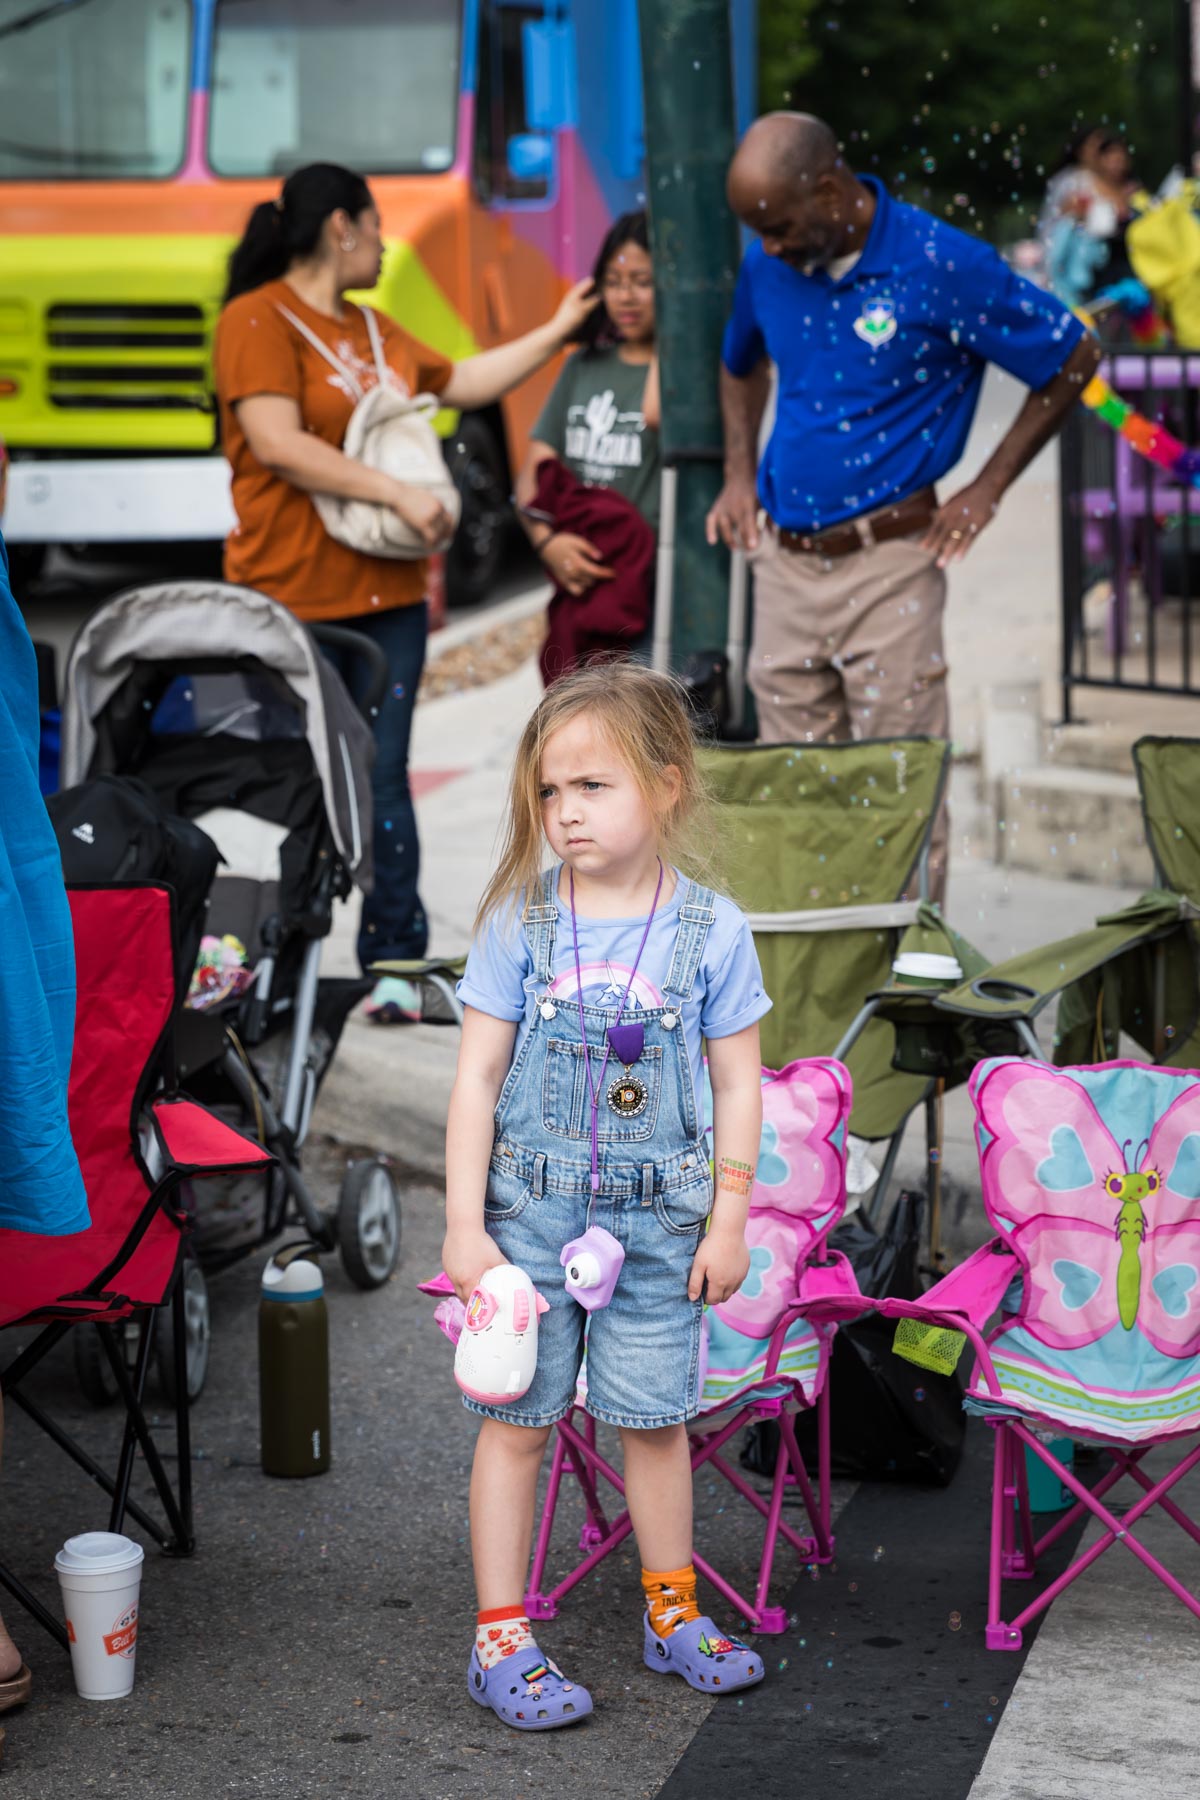 Little girl wearing blue shirt and overalls looking disappointed before parade for an article on the Fiesta photo tips